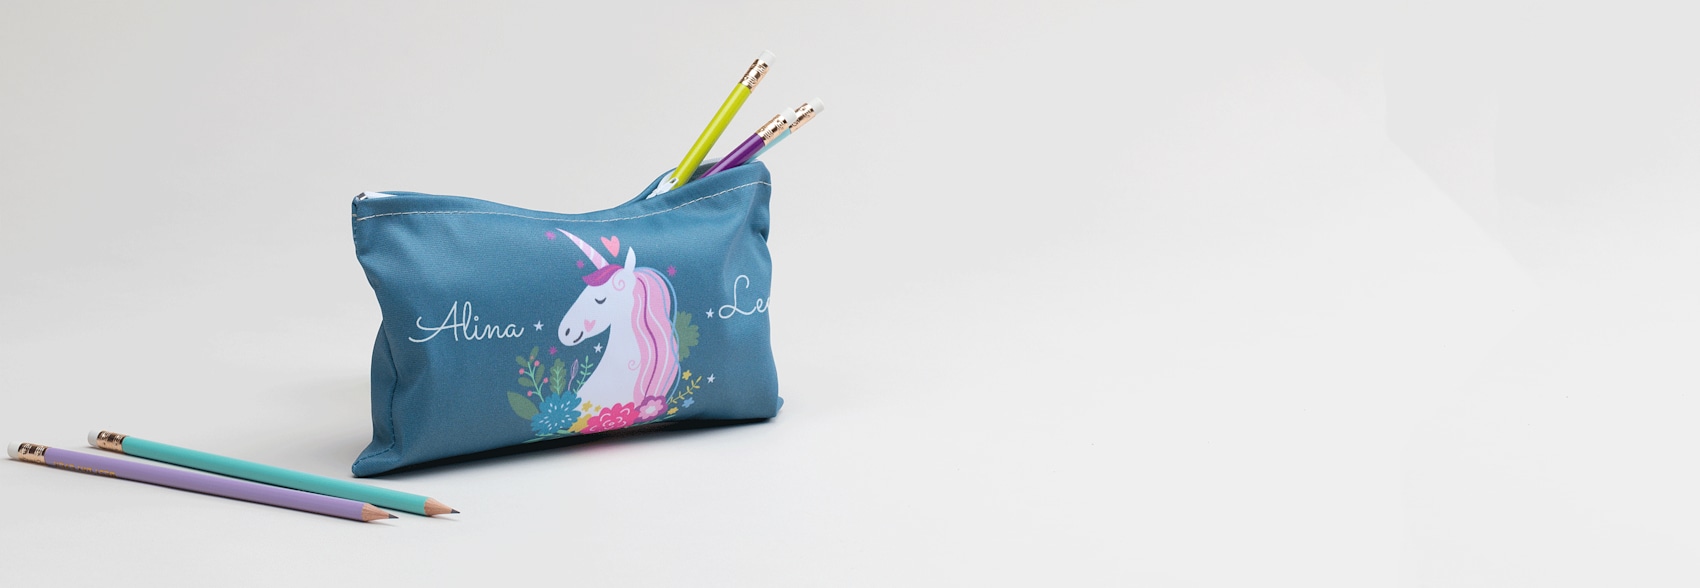 Personalised Pencil Cases 1